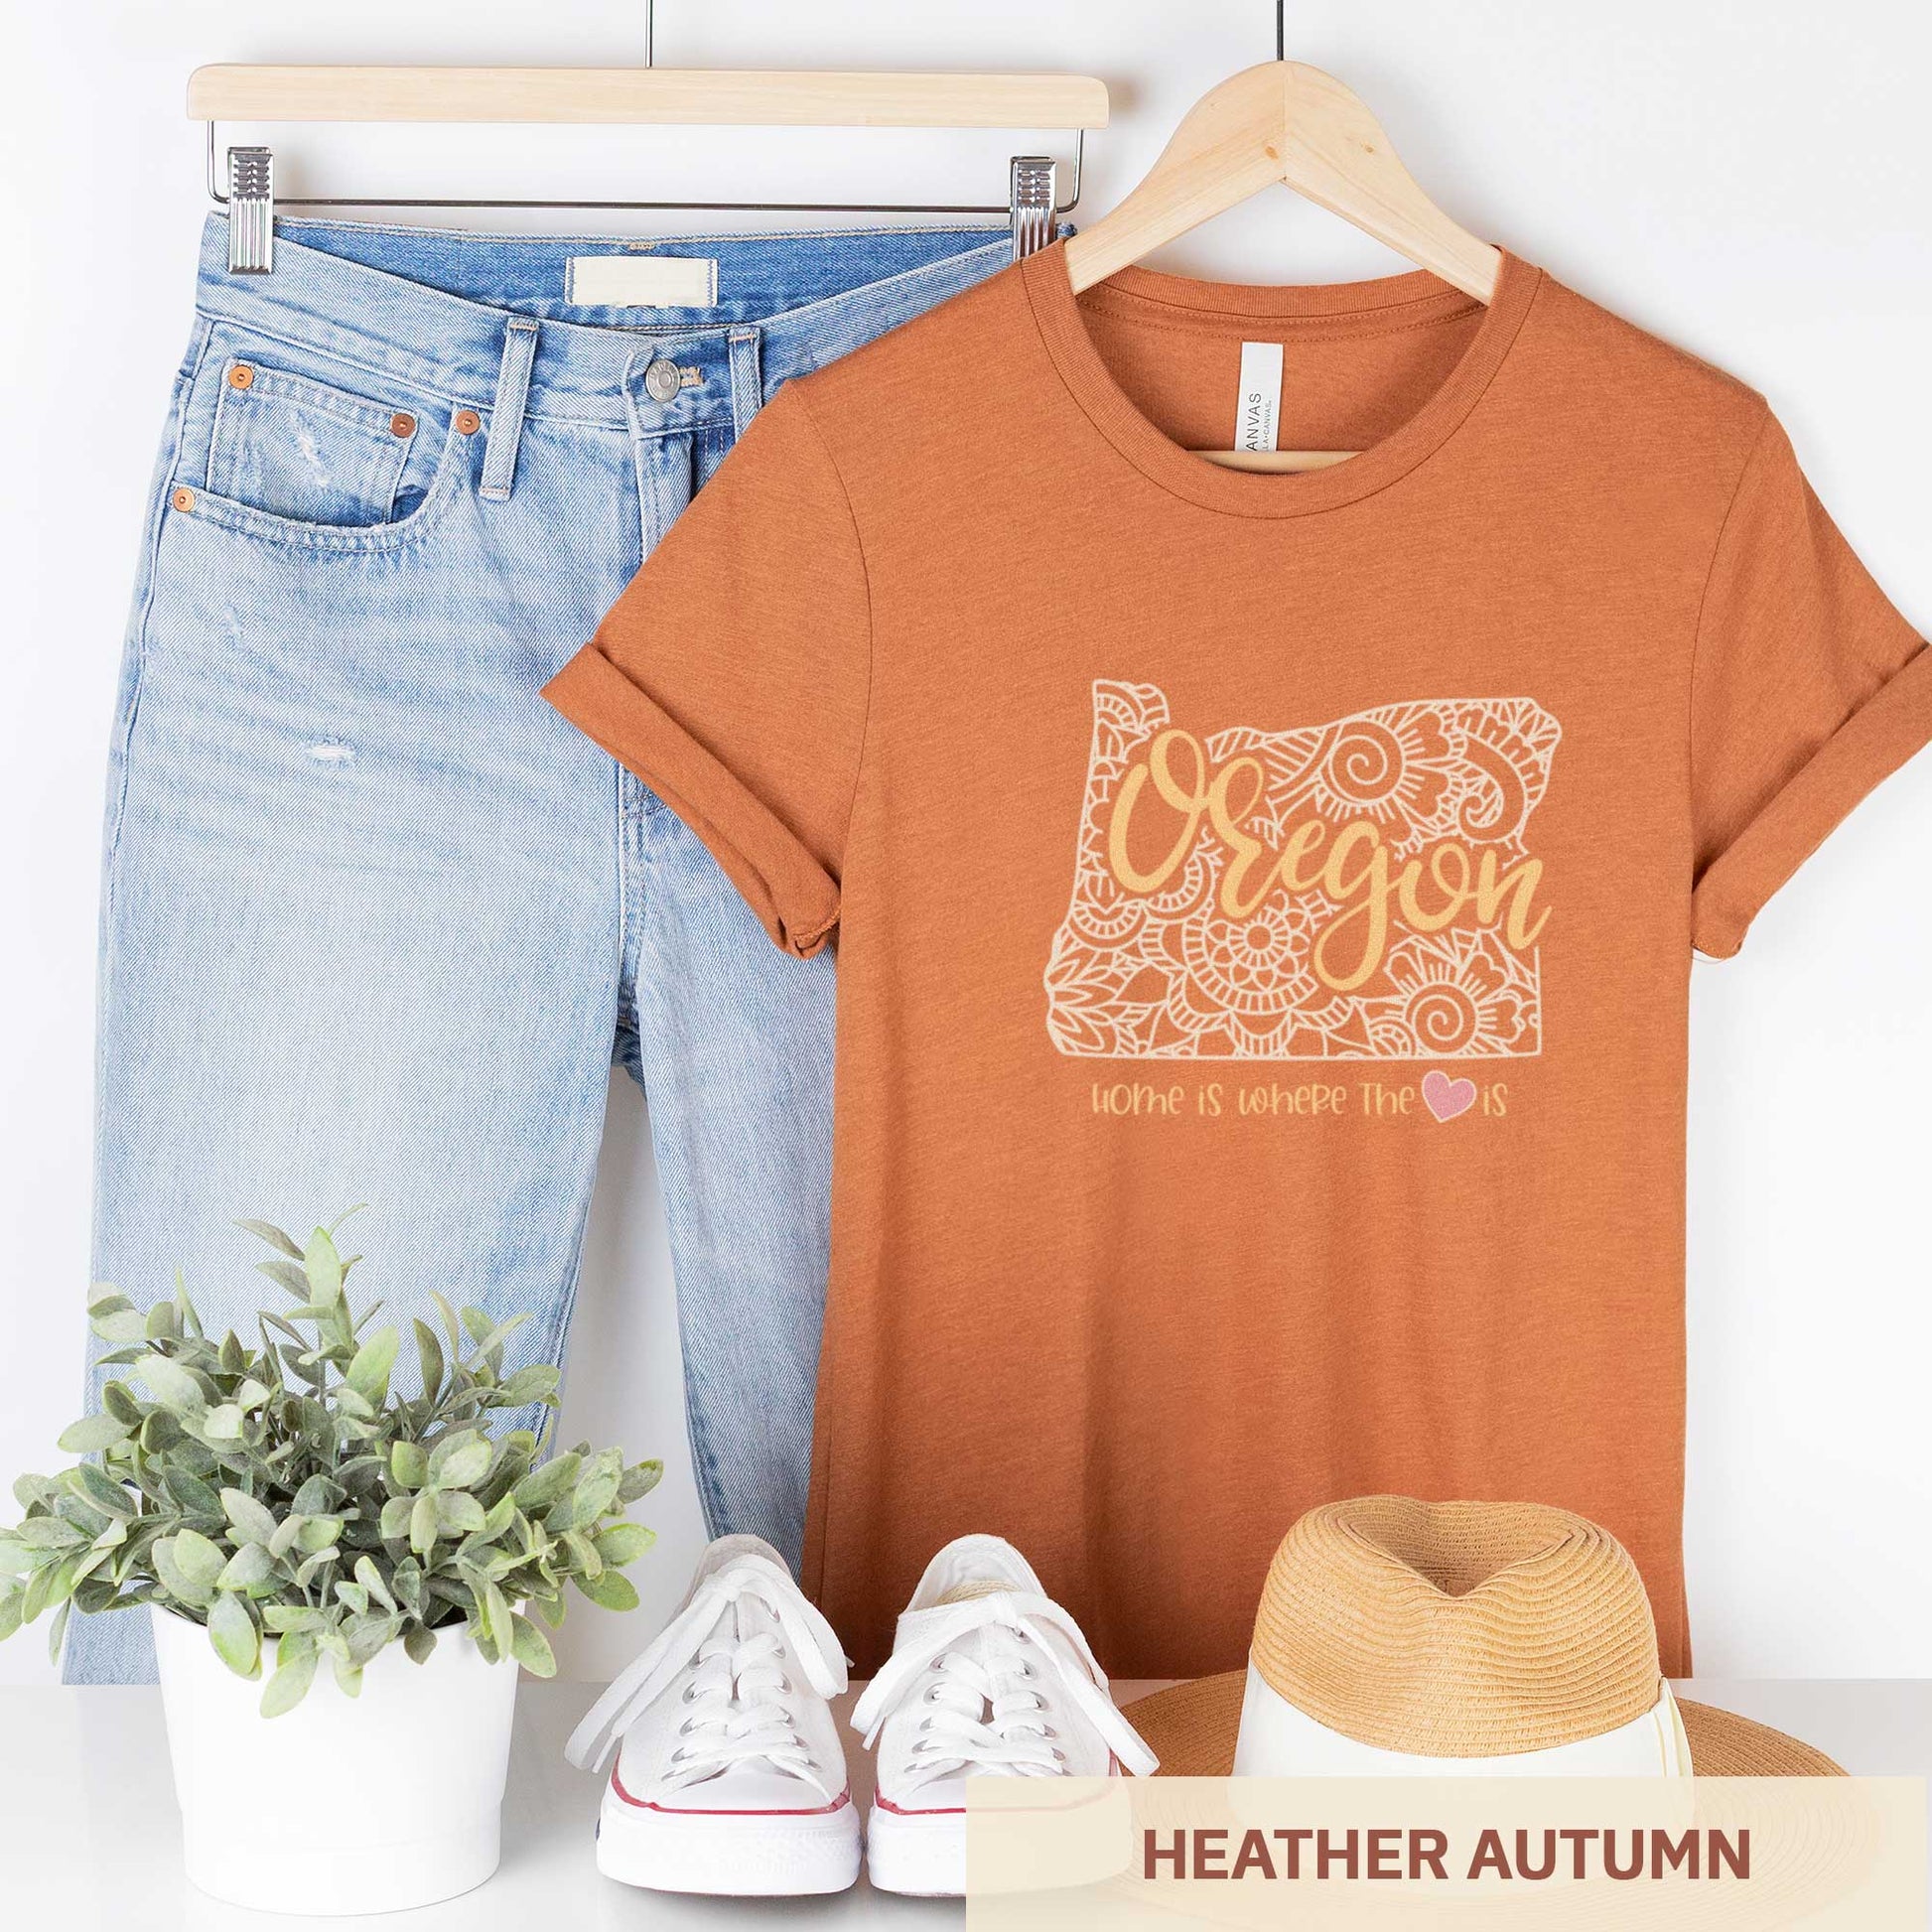 A hanging heather autumn Bella Canvas t-shirt featuring a mandala in the shape of Oregon with the words home is where the heart is.